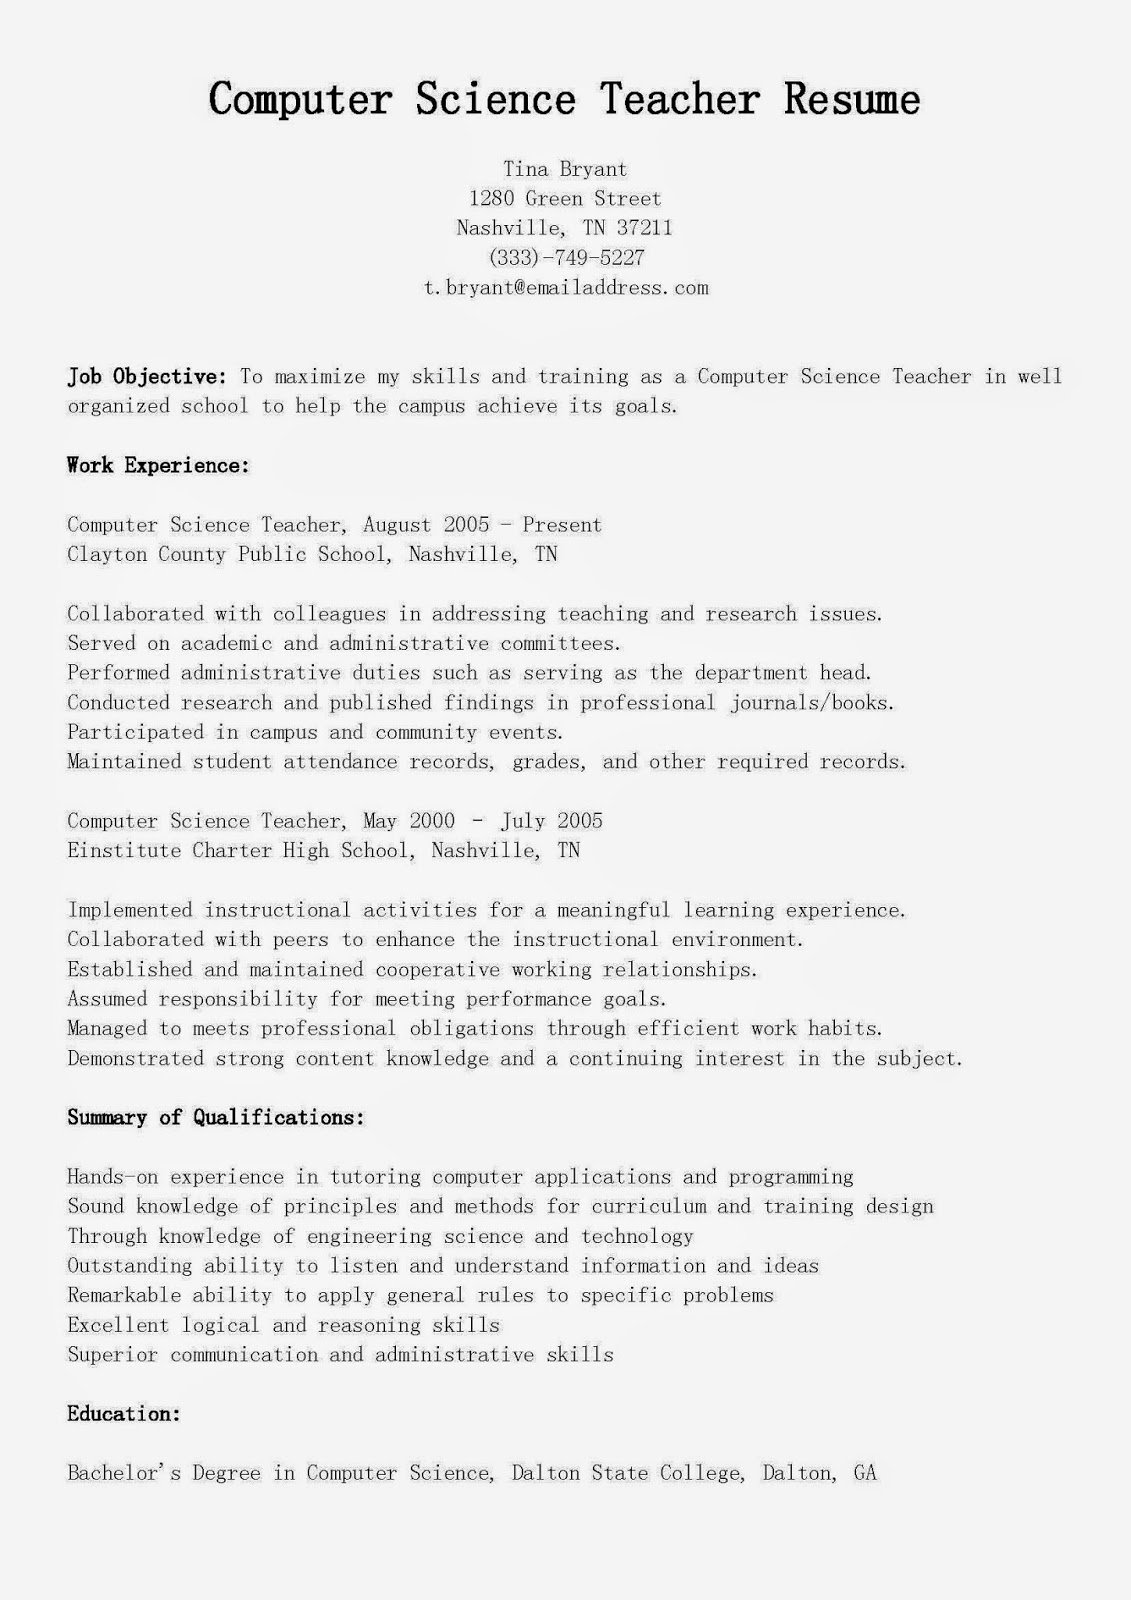 Computer Science Resume format New Resume Samples Puter Science Teacher Resume Sample